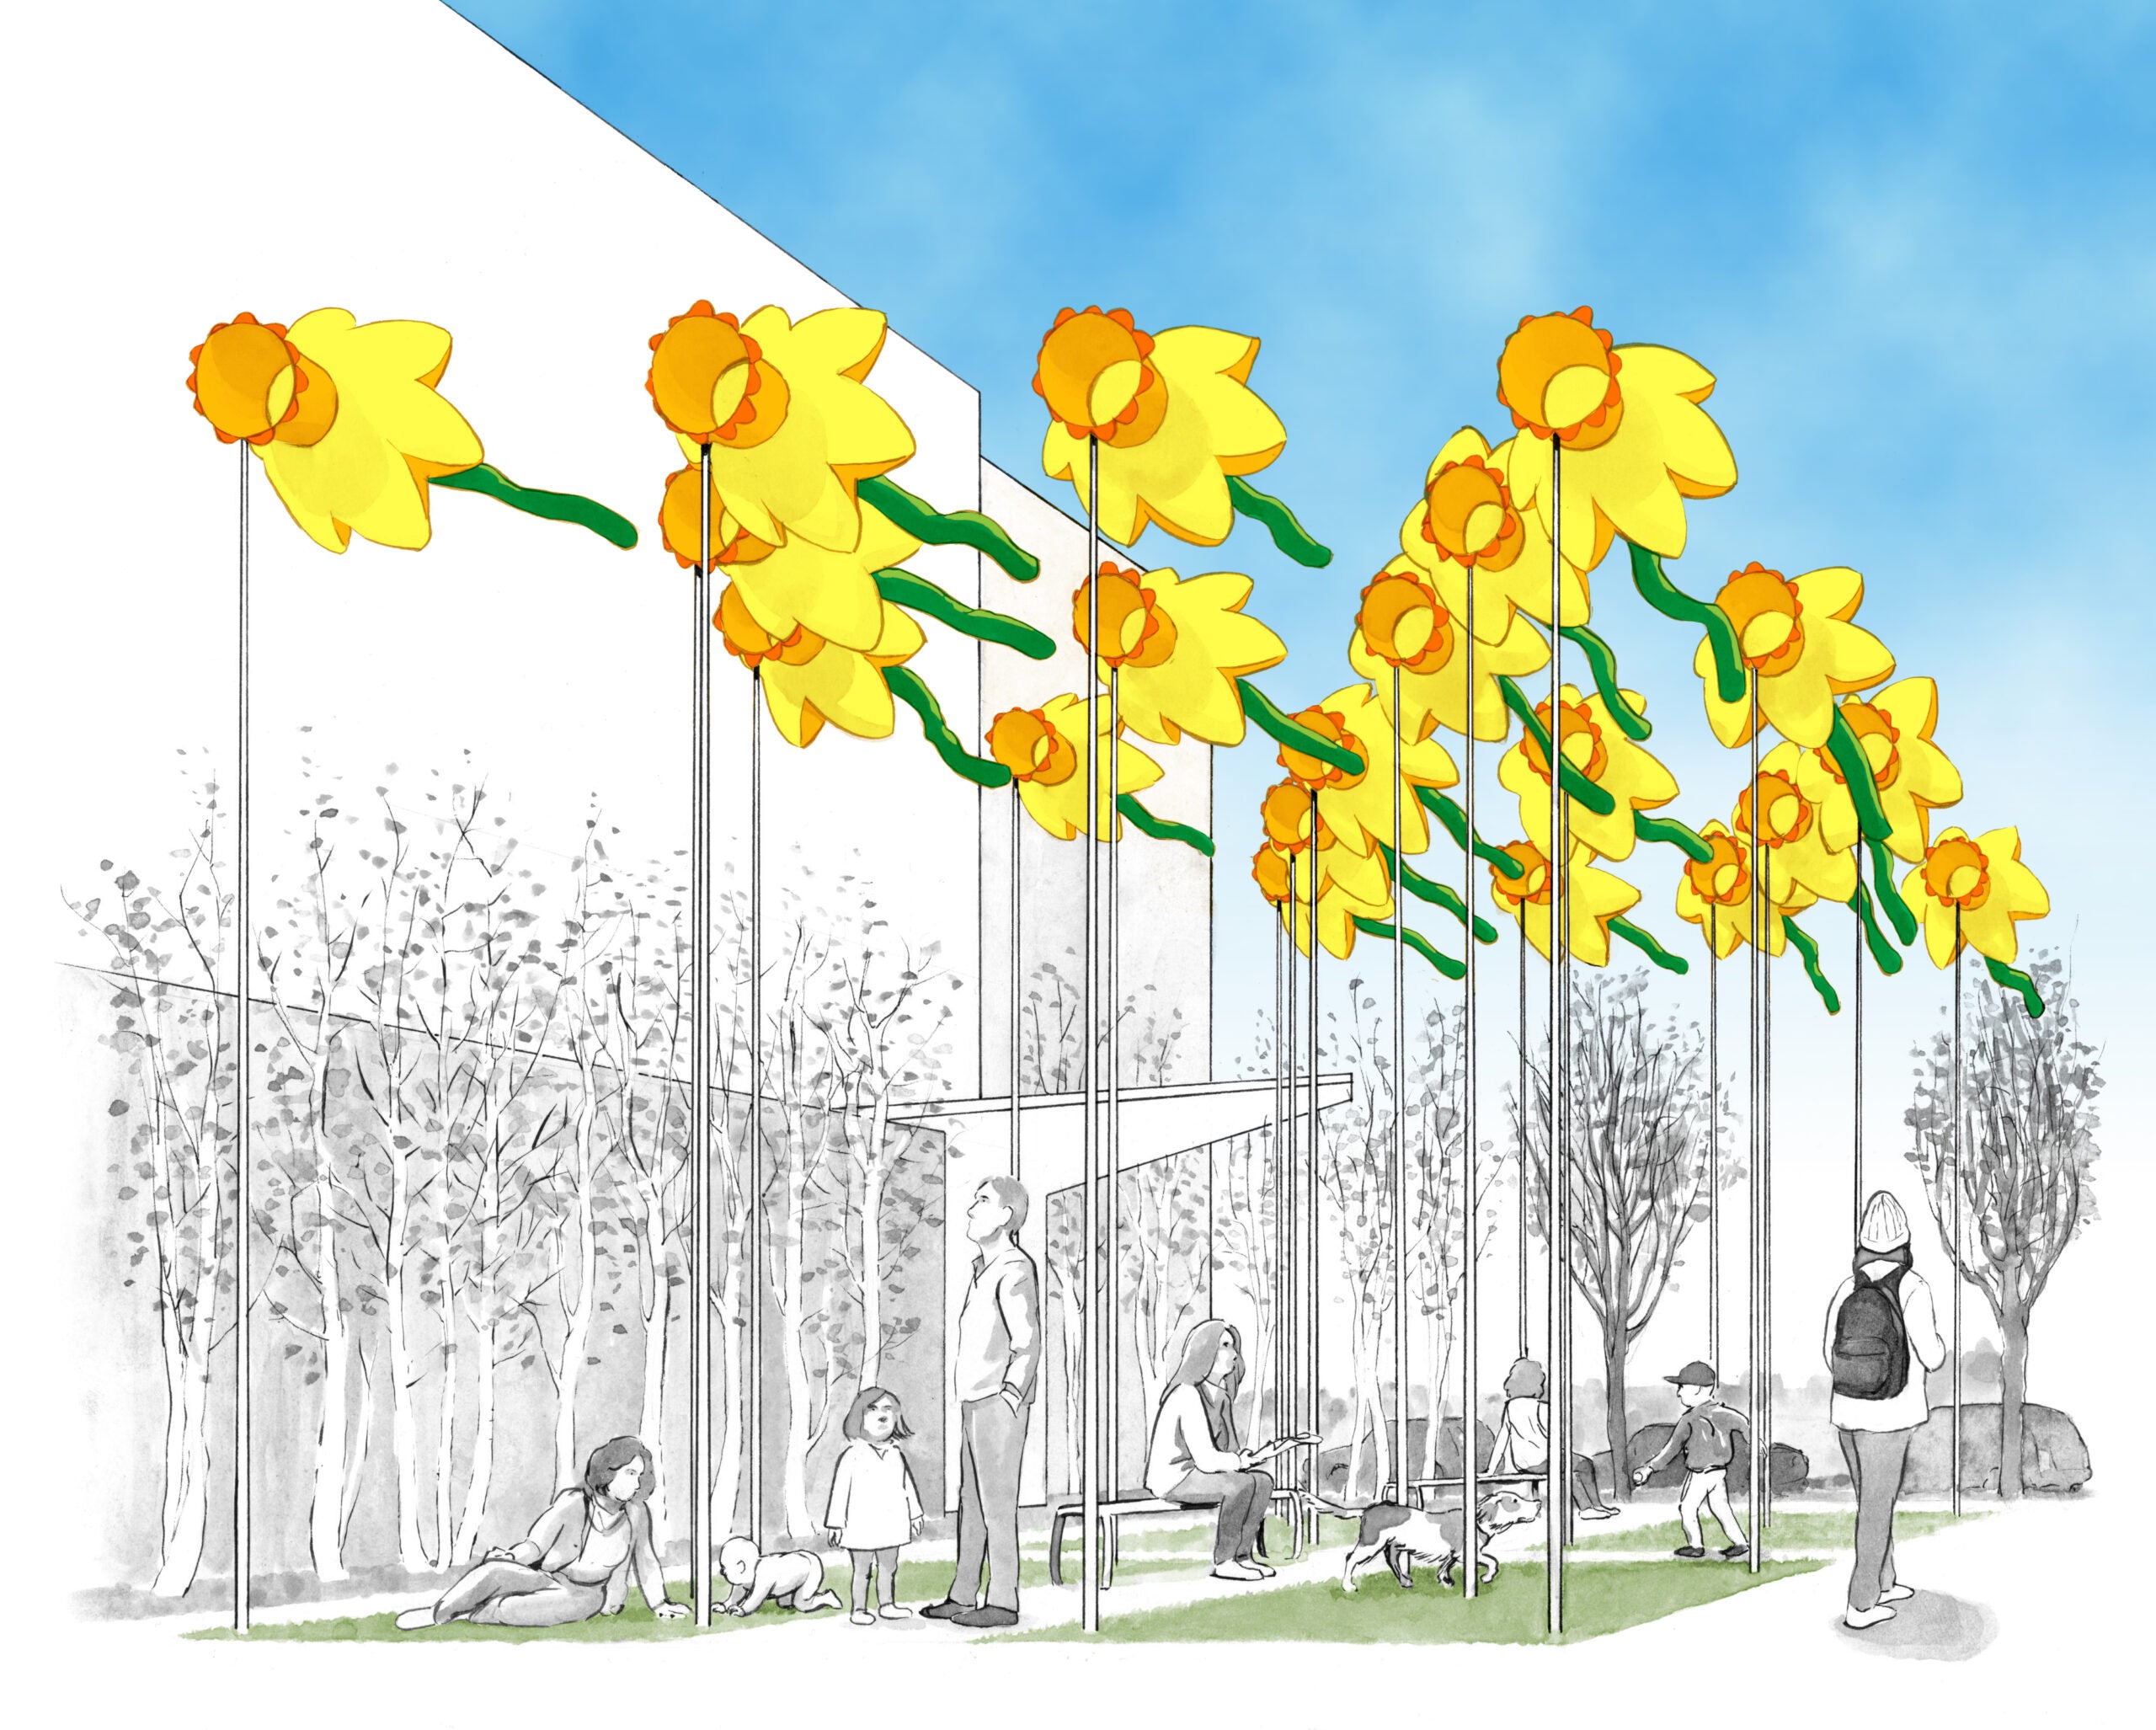 A rendering of 20 Knots: Daffodils for Boston.